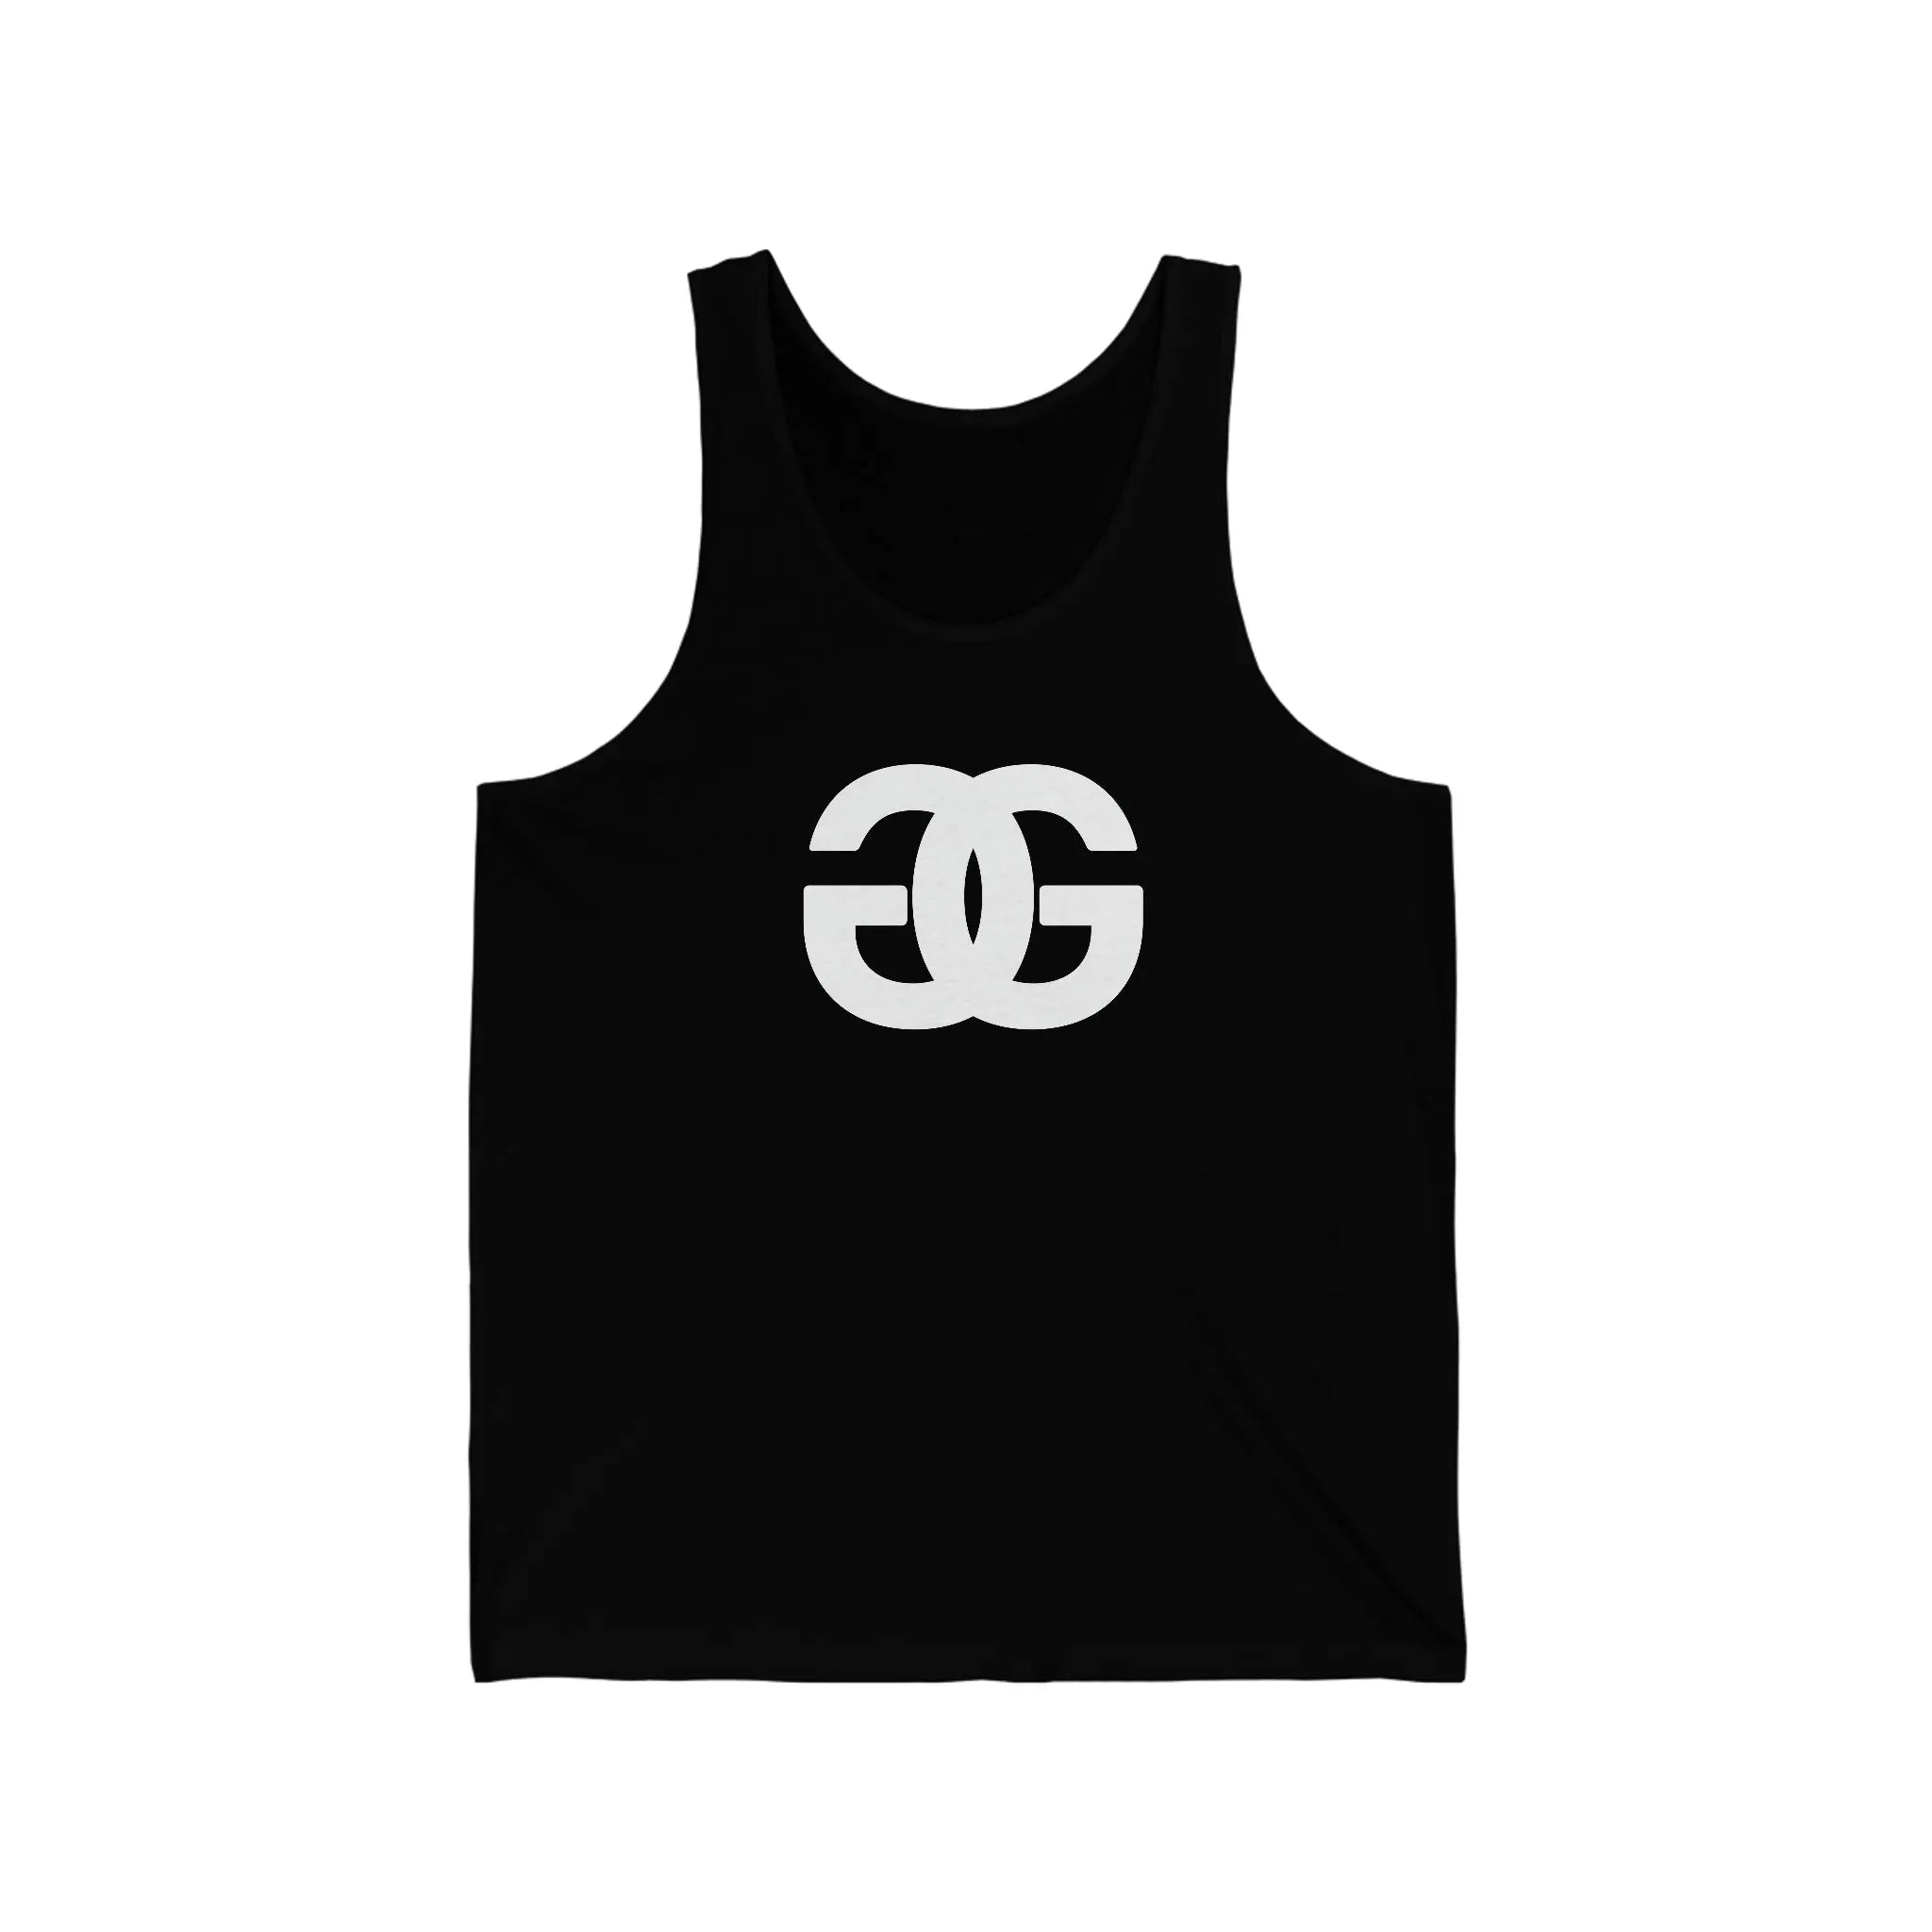  G is for Groove Relaxed Fit Jersey Tank Tank Top2XLBlack